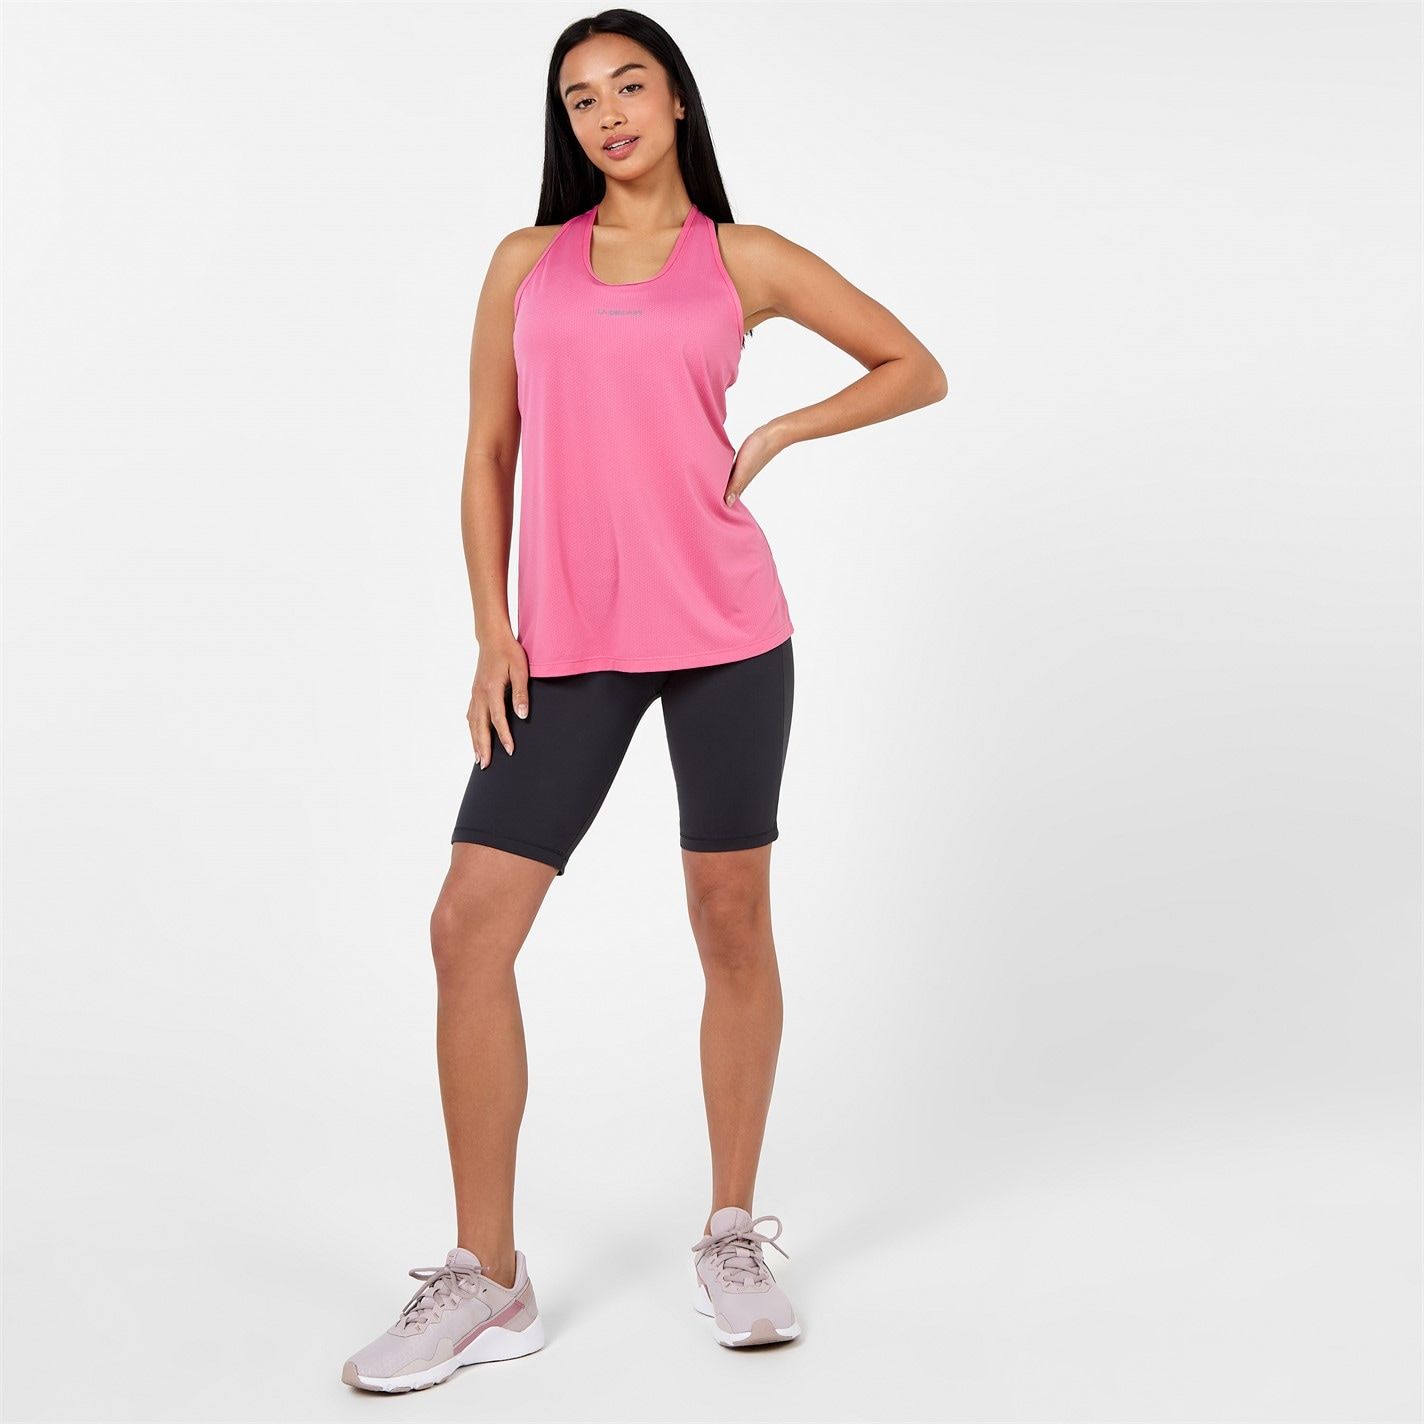 LA Gear Racer Vest - This LA Gear fitted racer vest is the perfect addition to add to your activewear. Its sleeveless sweat wicking stretchy construction features a racer back and power mesh panelling to ensure a comfortable fit that is also breathable. This vest also benefits from having a internal bra support to give you that added support when needed. LA Gear branding is subtly featured to the front of the chest to complete the look.   >Sleeveless  >Racer back  >Flat lock seams  >Mesh panelling  >Internal bra  >Lightweight  >Stretchy  >Keyhole detail to back  >Reflective detail  >Printed logo  >84% Polyester 16% elastane  >Machine Washable